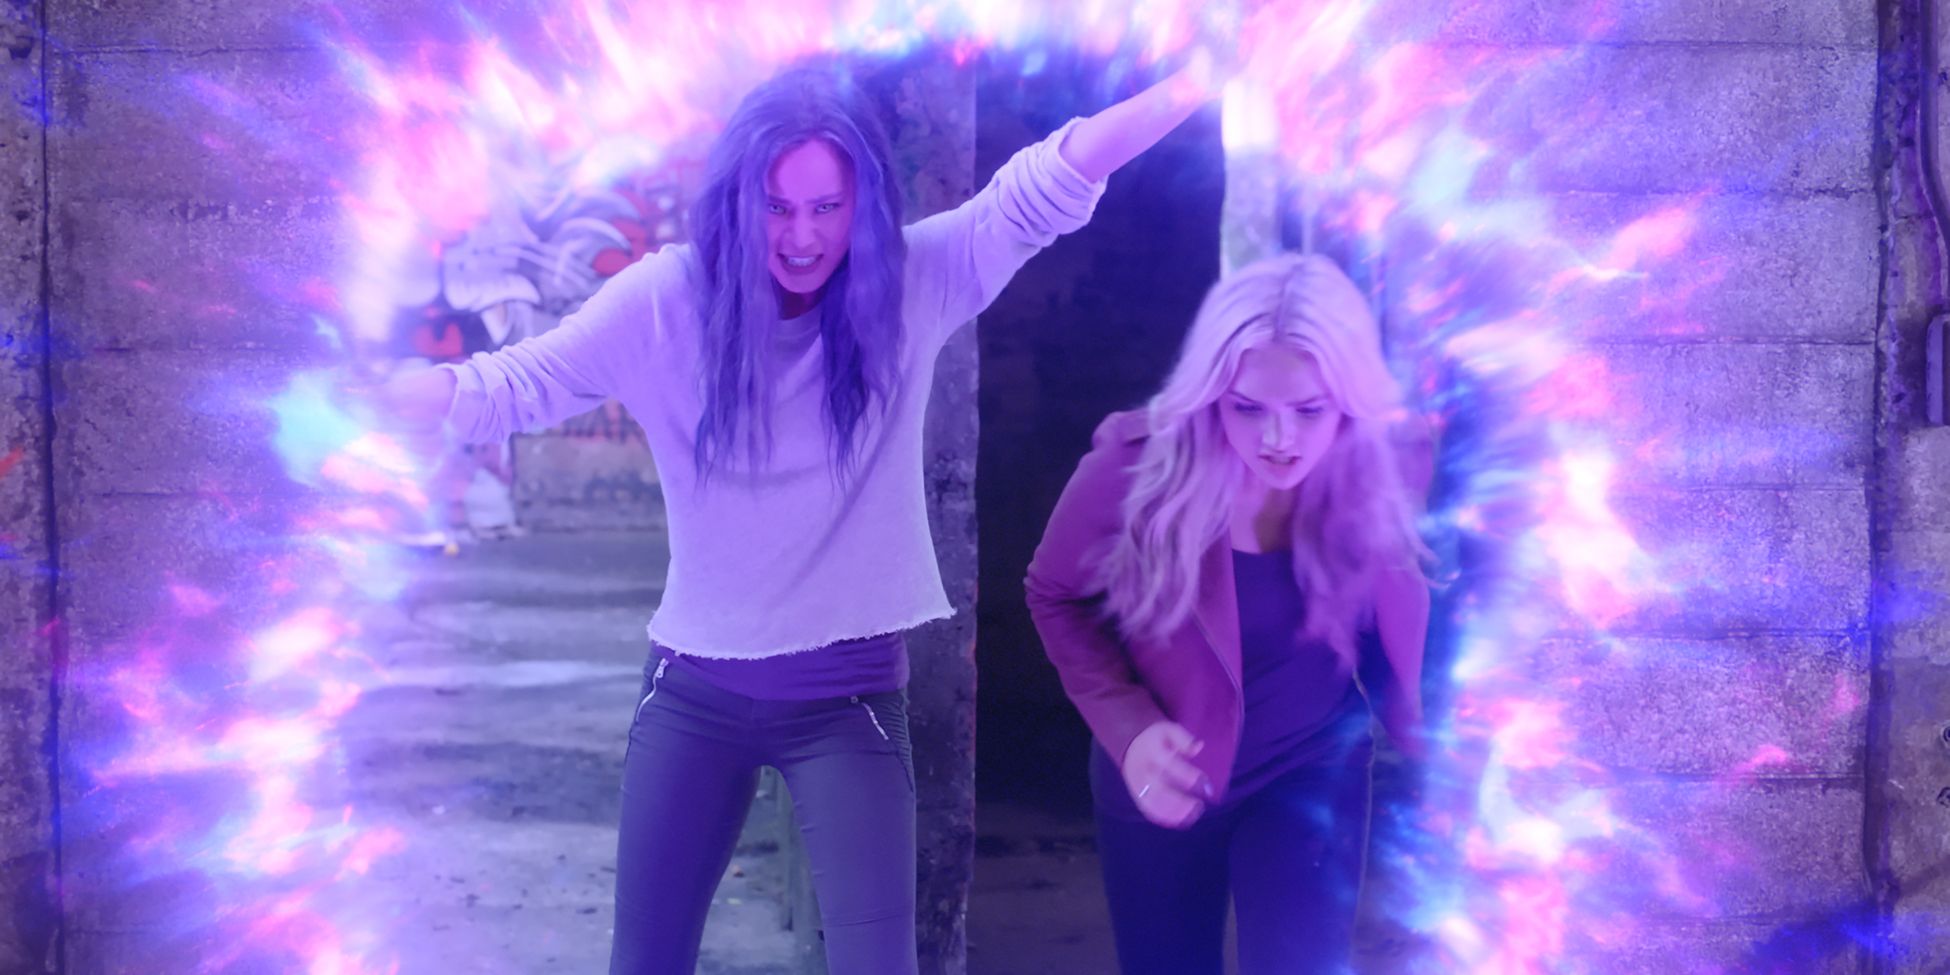 Jamie Chung and Natalie Alyn Lind in The Gifted Season 2